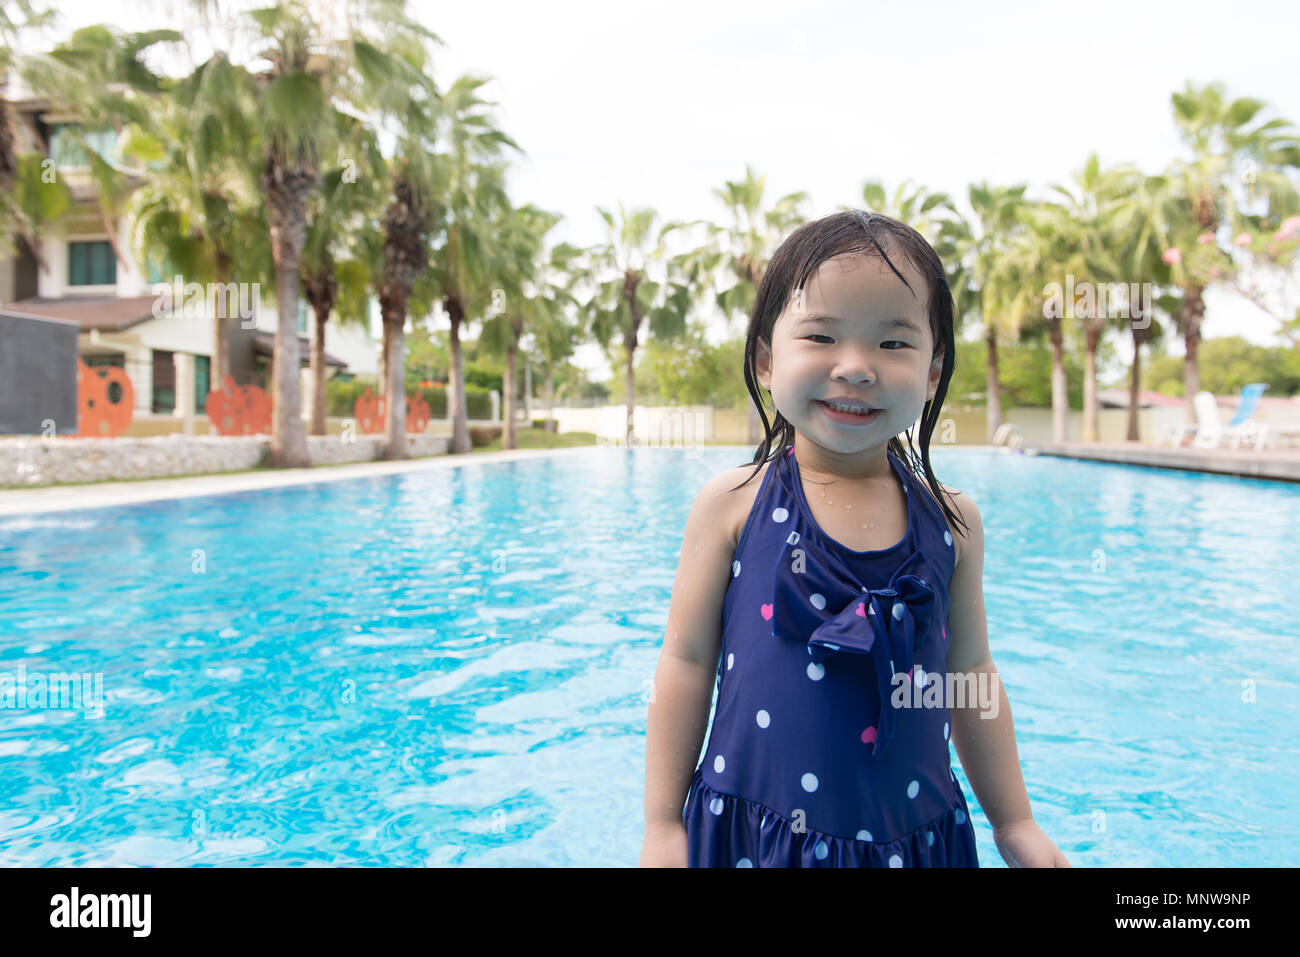 Asian little baby girl in swimming pool Stock Photo